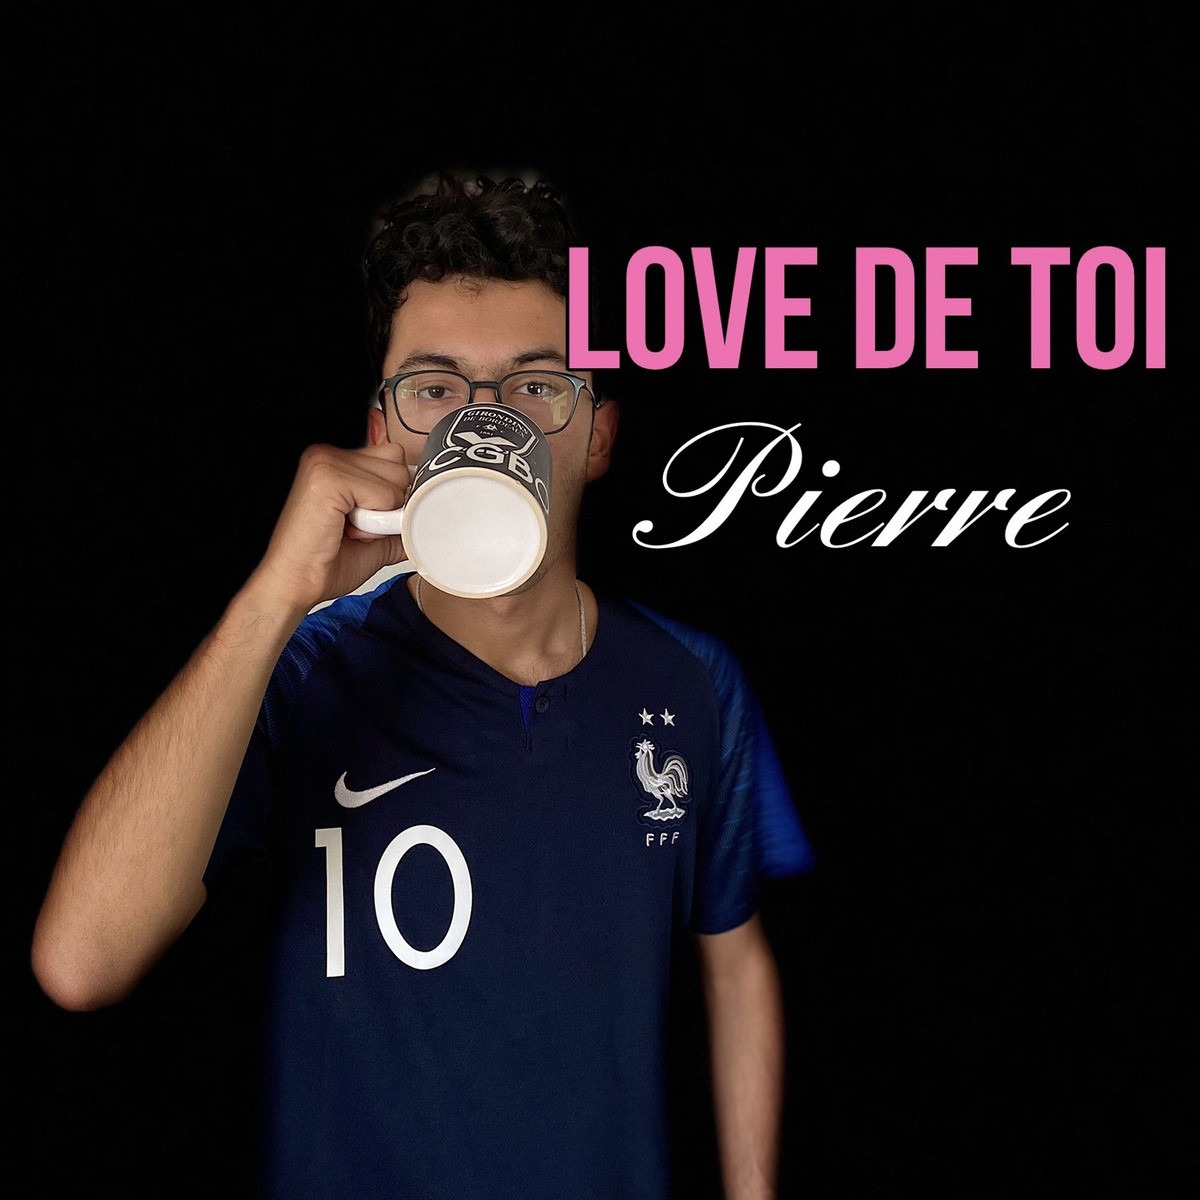 Love De Toi Song Download Love De Toi Mp3 French Song Online Free On Gaana Com